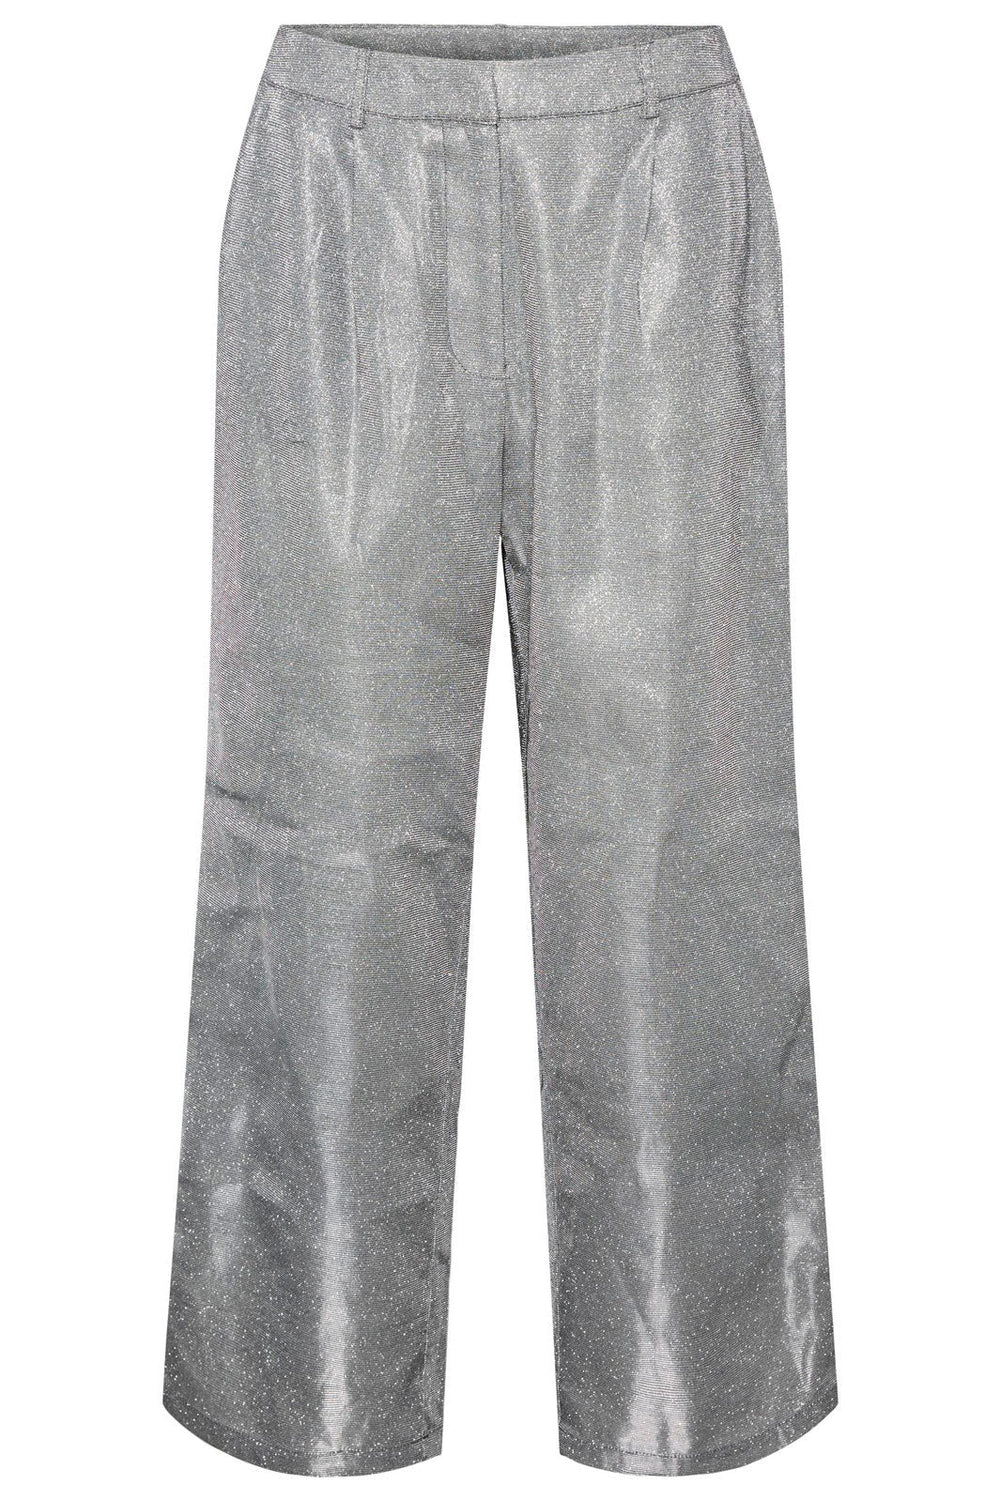 Pieces - Pcglitty Hw Wide Pants Dmo - Silver Bukser 